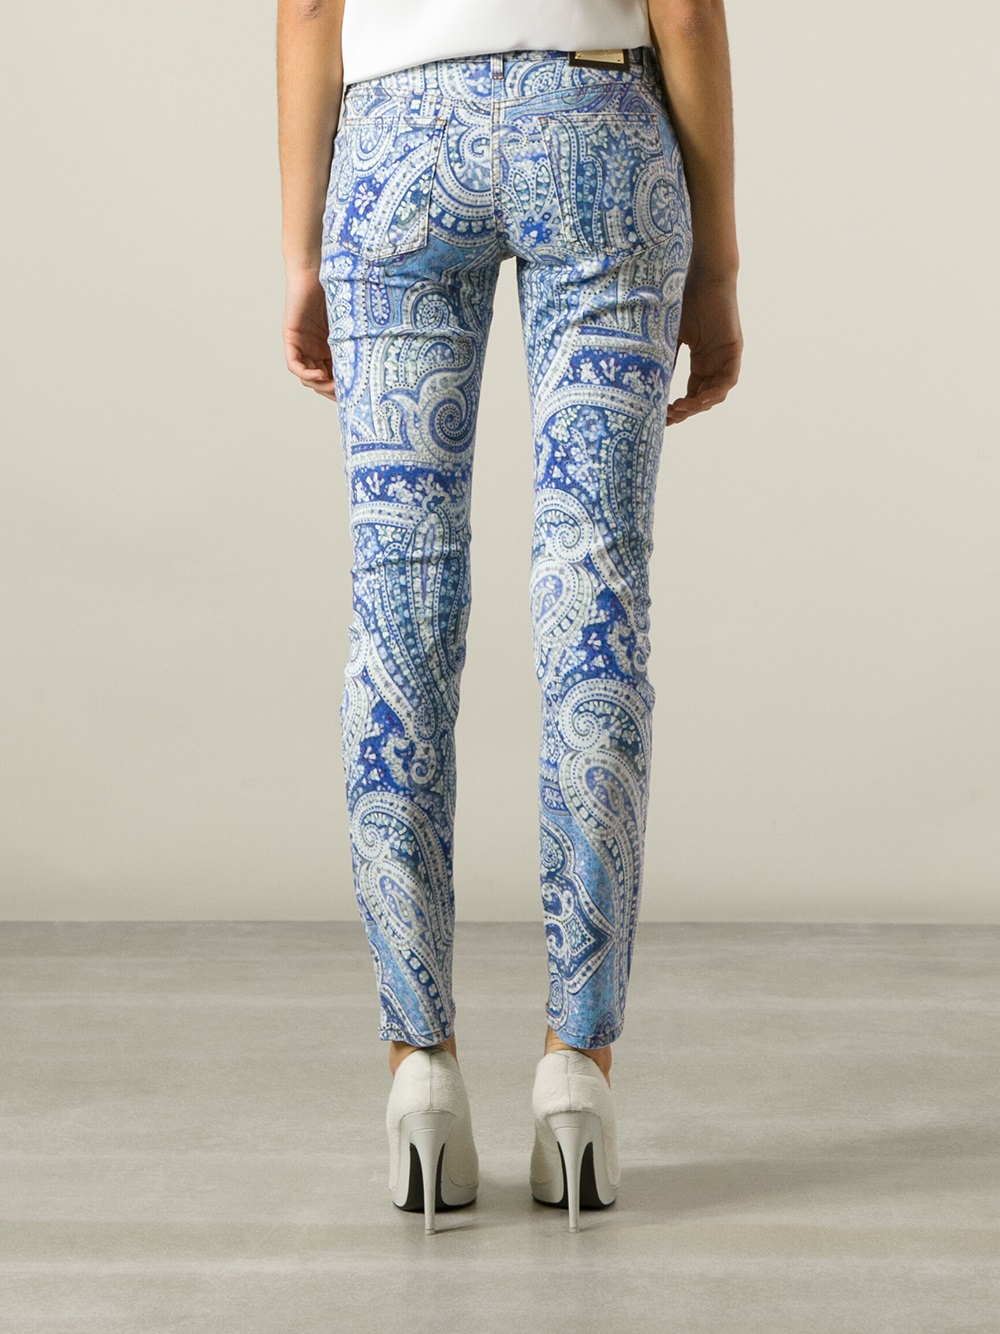 Etro Paisley Print Jeans in Blue | Lyst